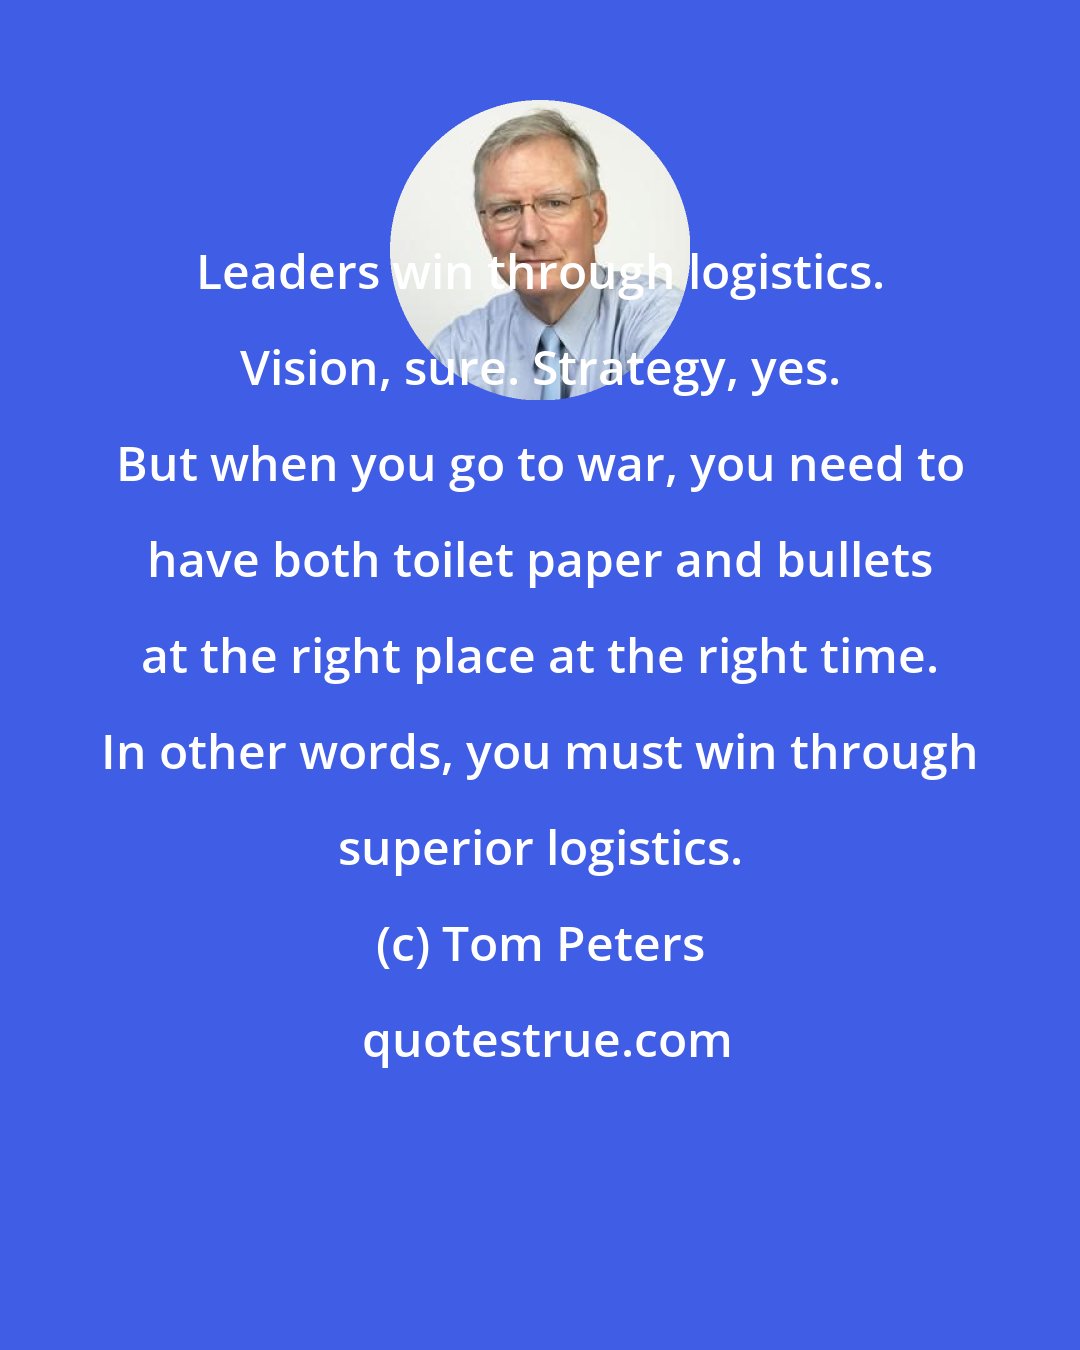 Tom Peters: Leaders win through logistics. Vision, sure. Strategy, yes. But when you go to war, you need to have both toilet paper and bullets at the right place at the right time. In other words, you must win through superior logistics.